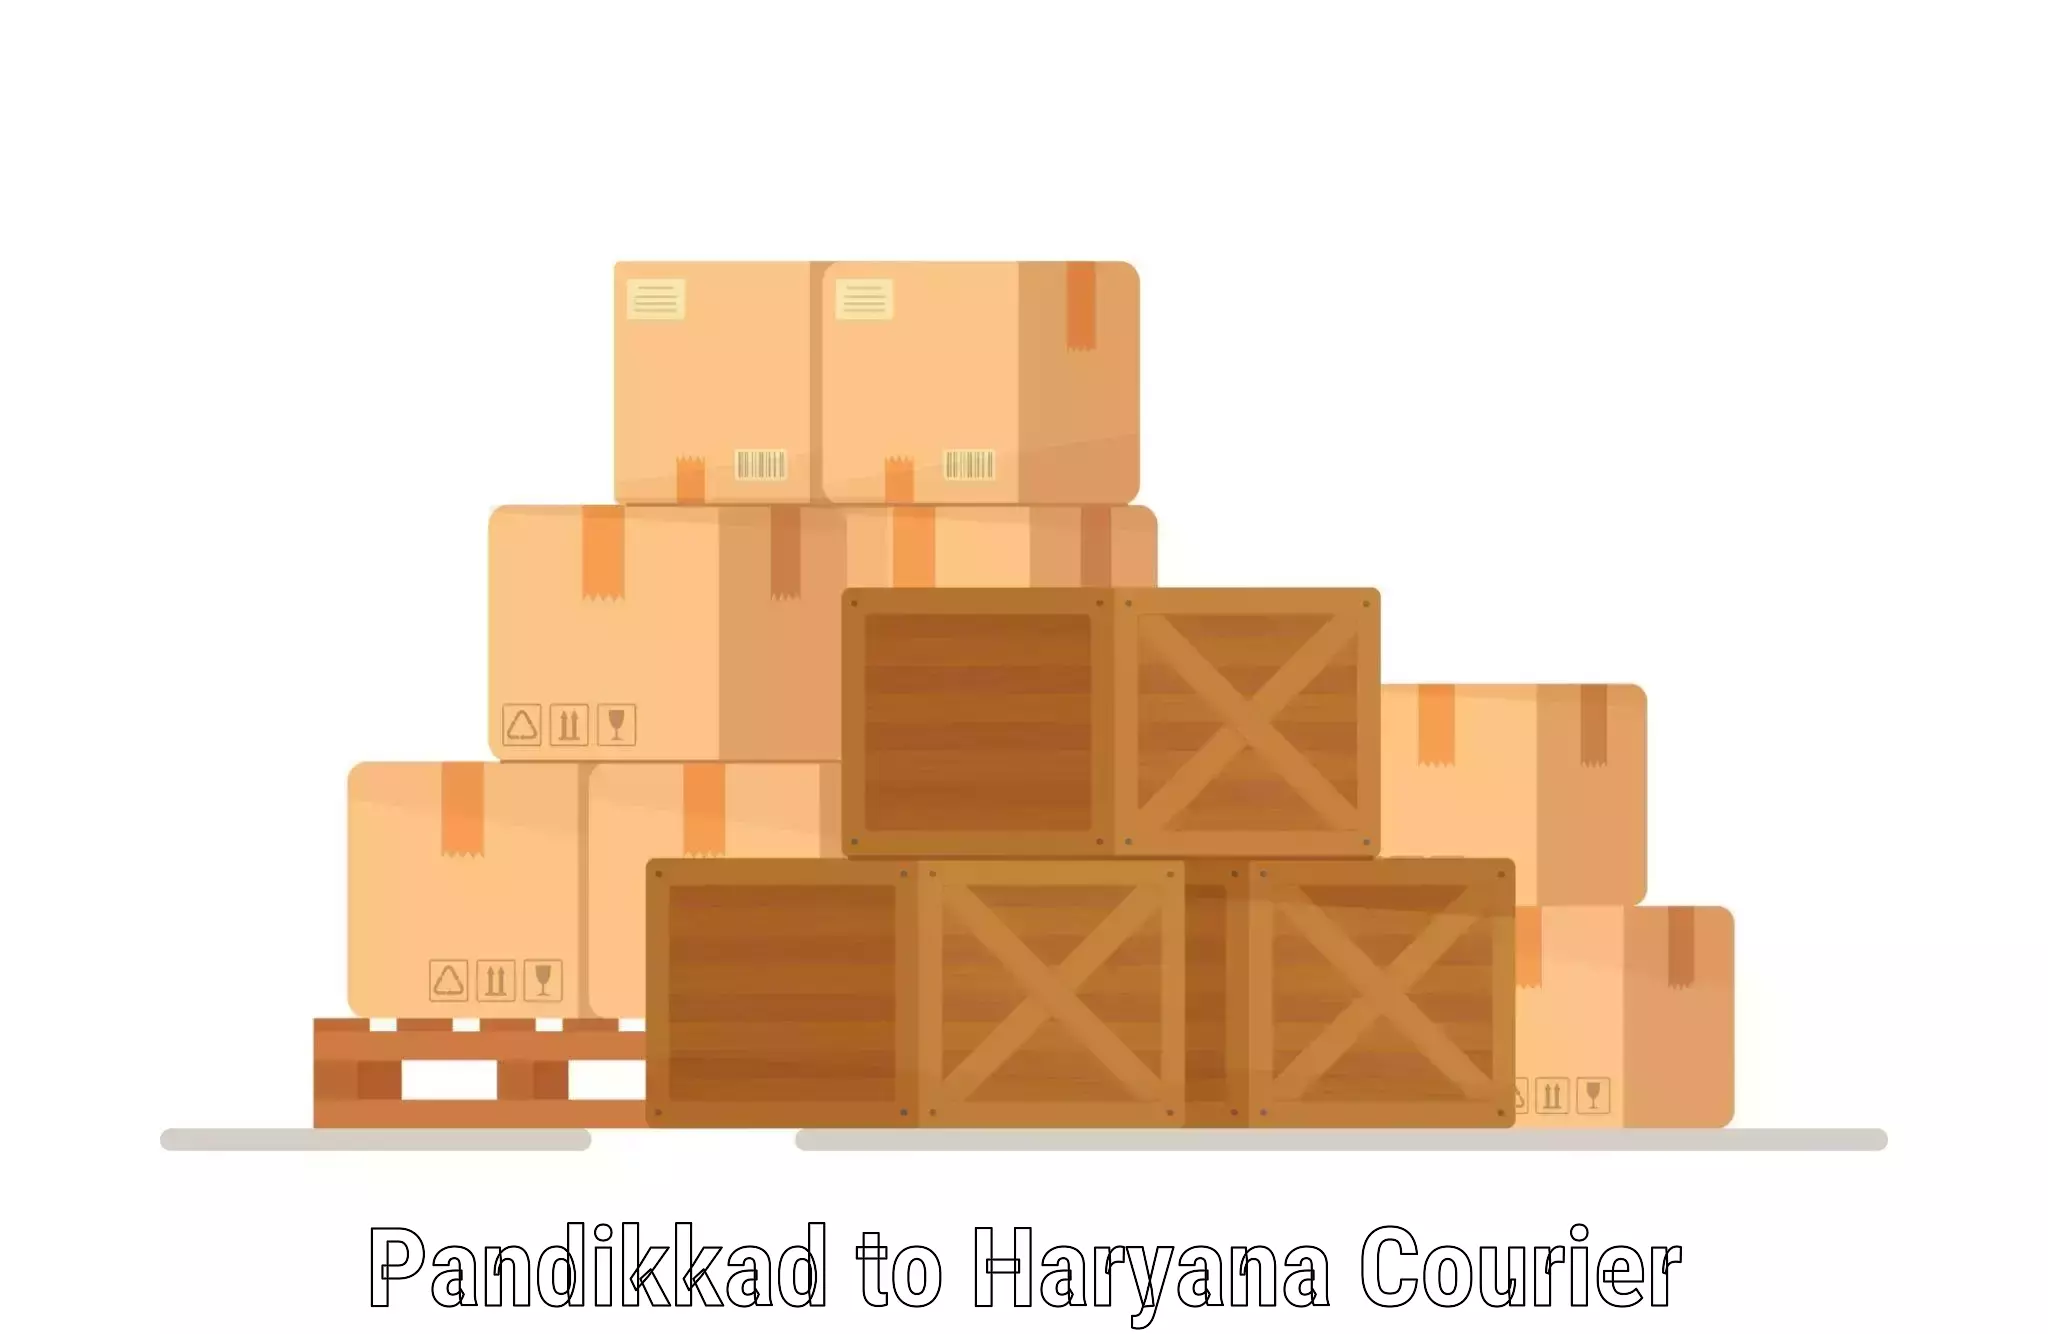 Holiday shipping services Pandikkad to Pinjore